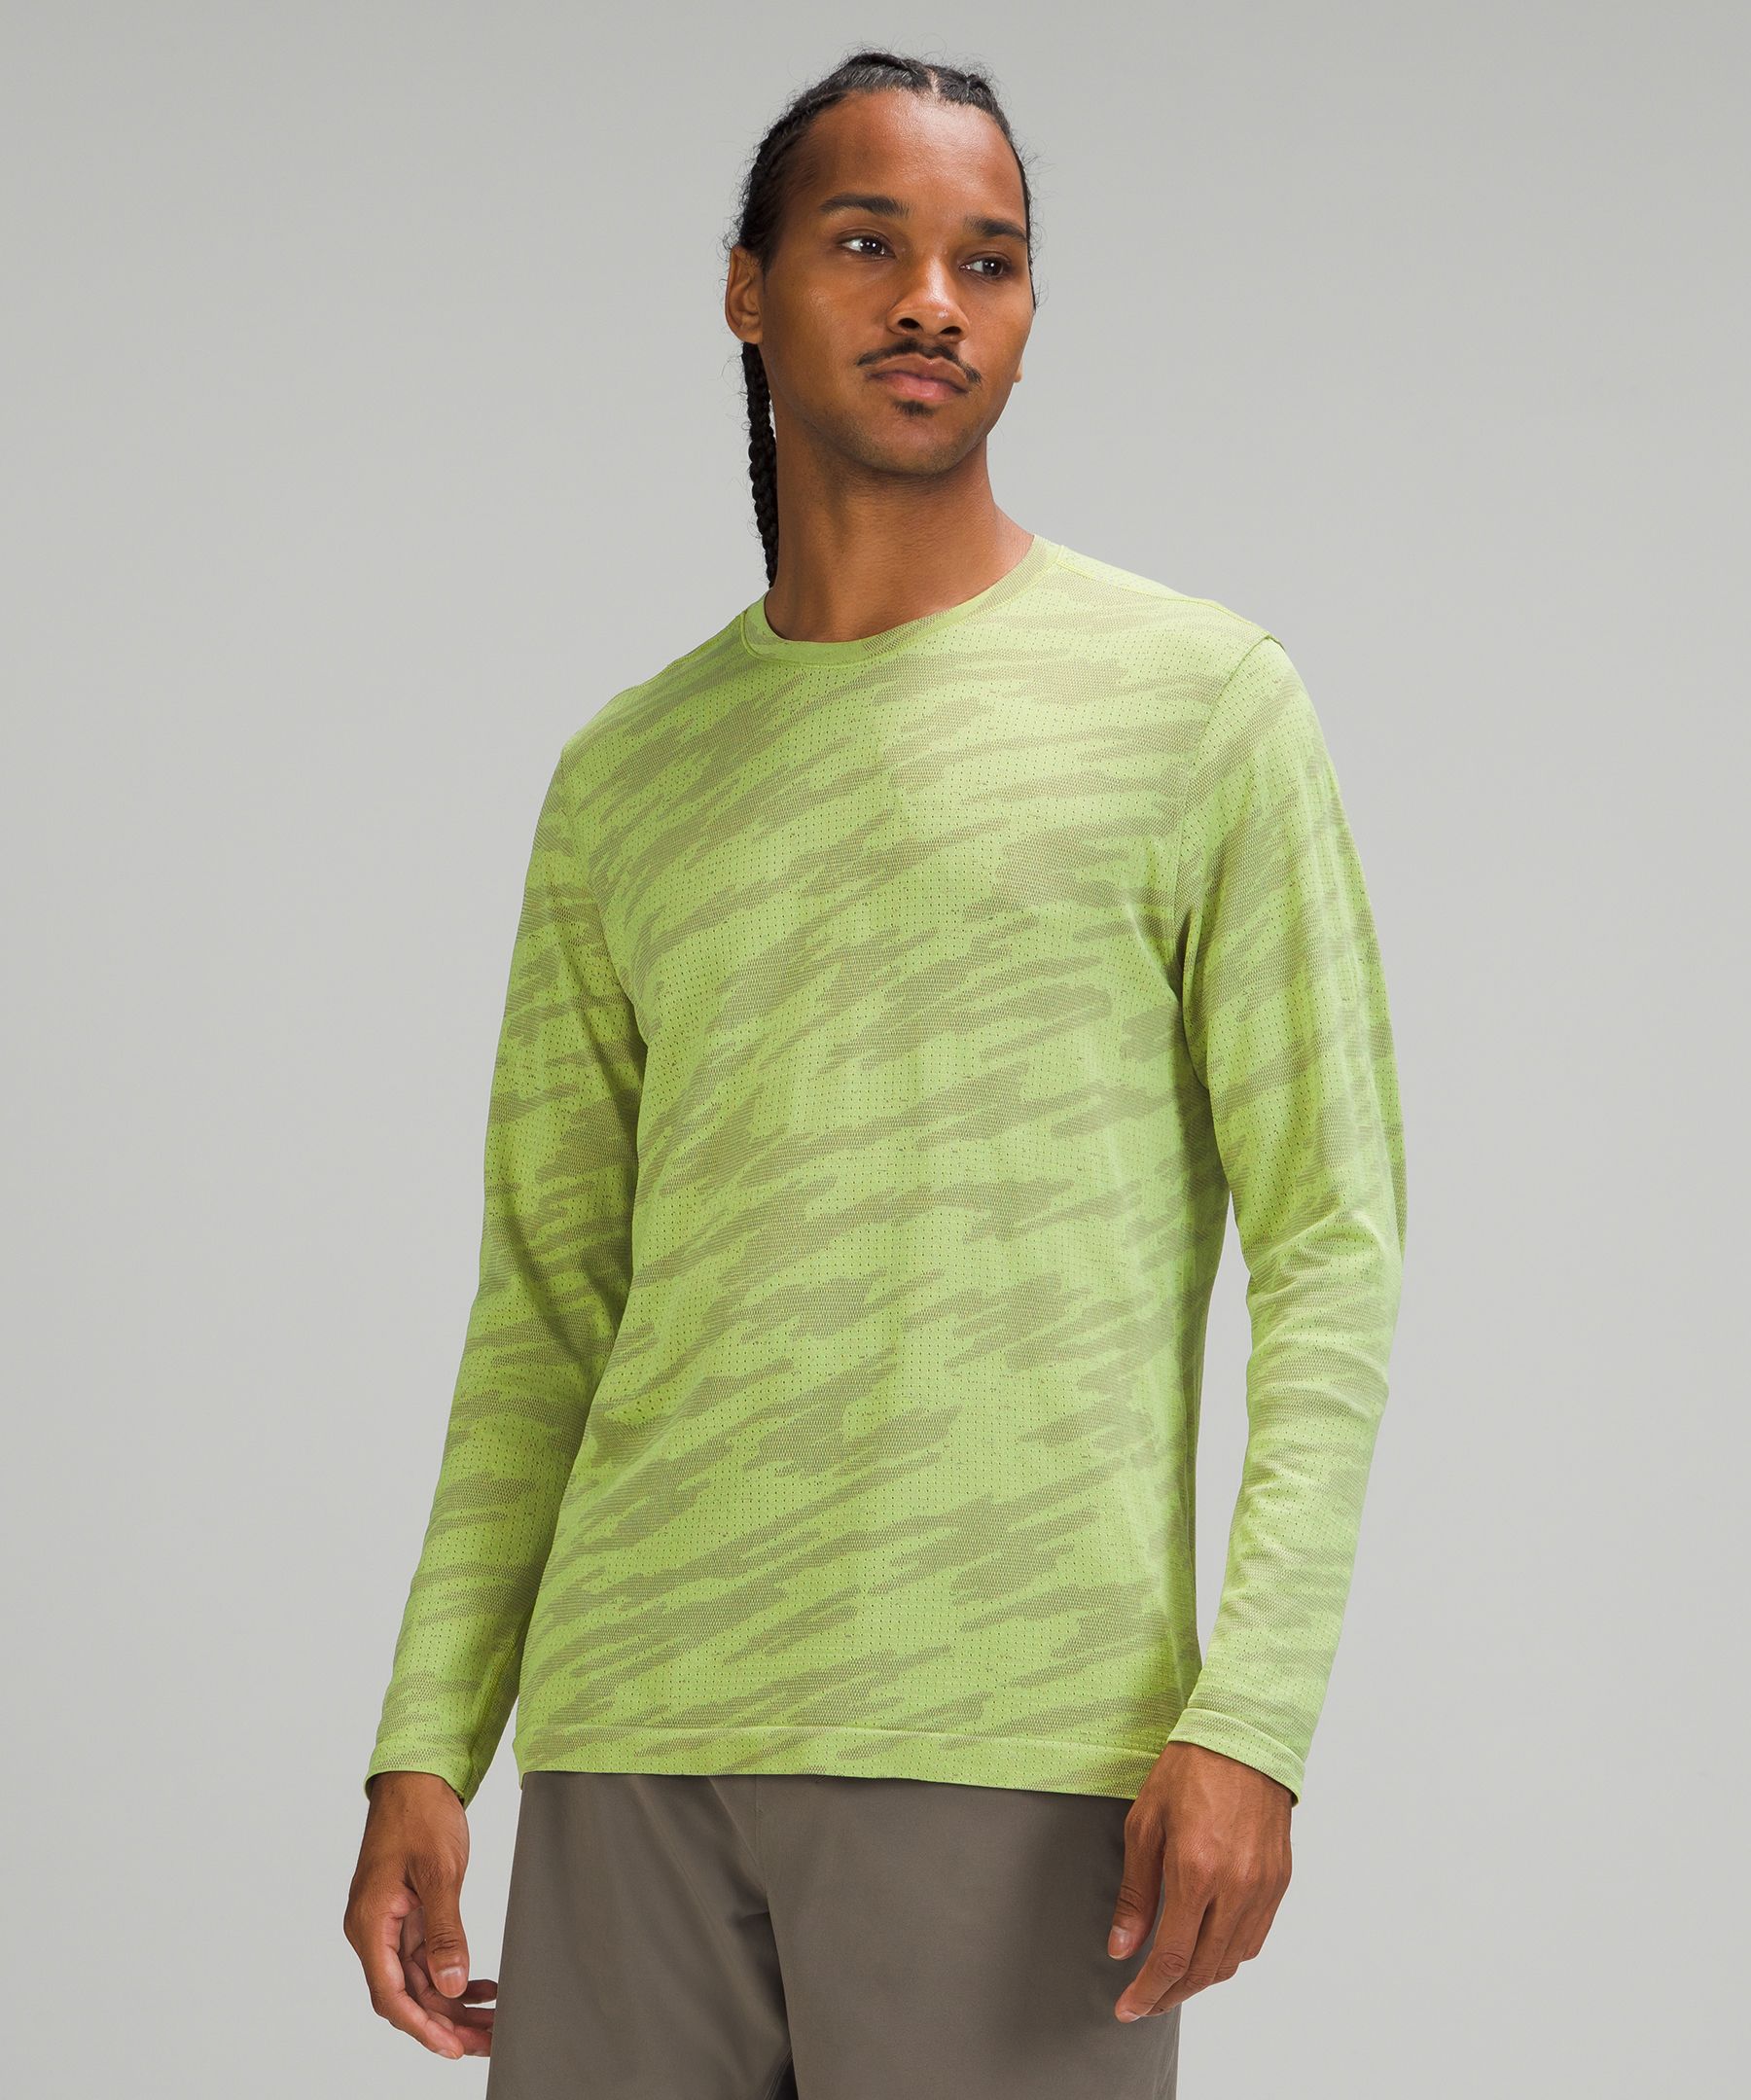 Lululemon Metal Vent Breathe Long Sleeve Shirt In Scatter Surface Rover/neo Mint